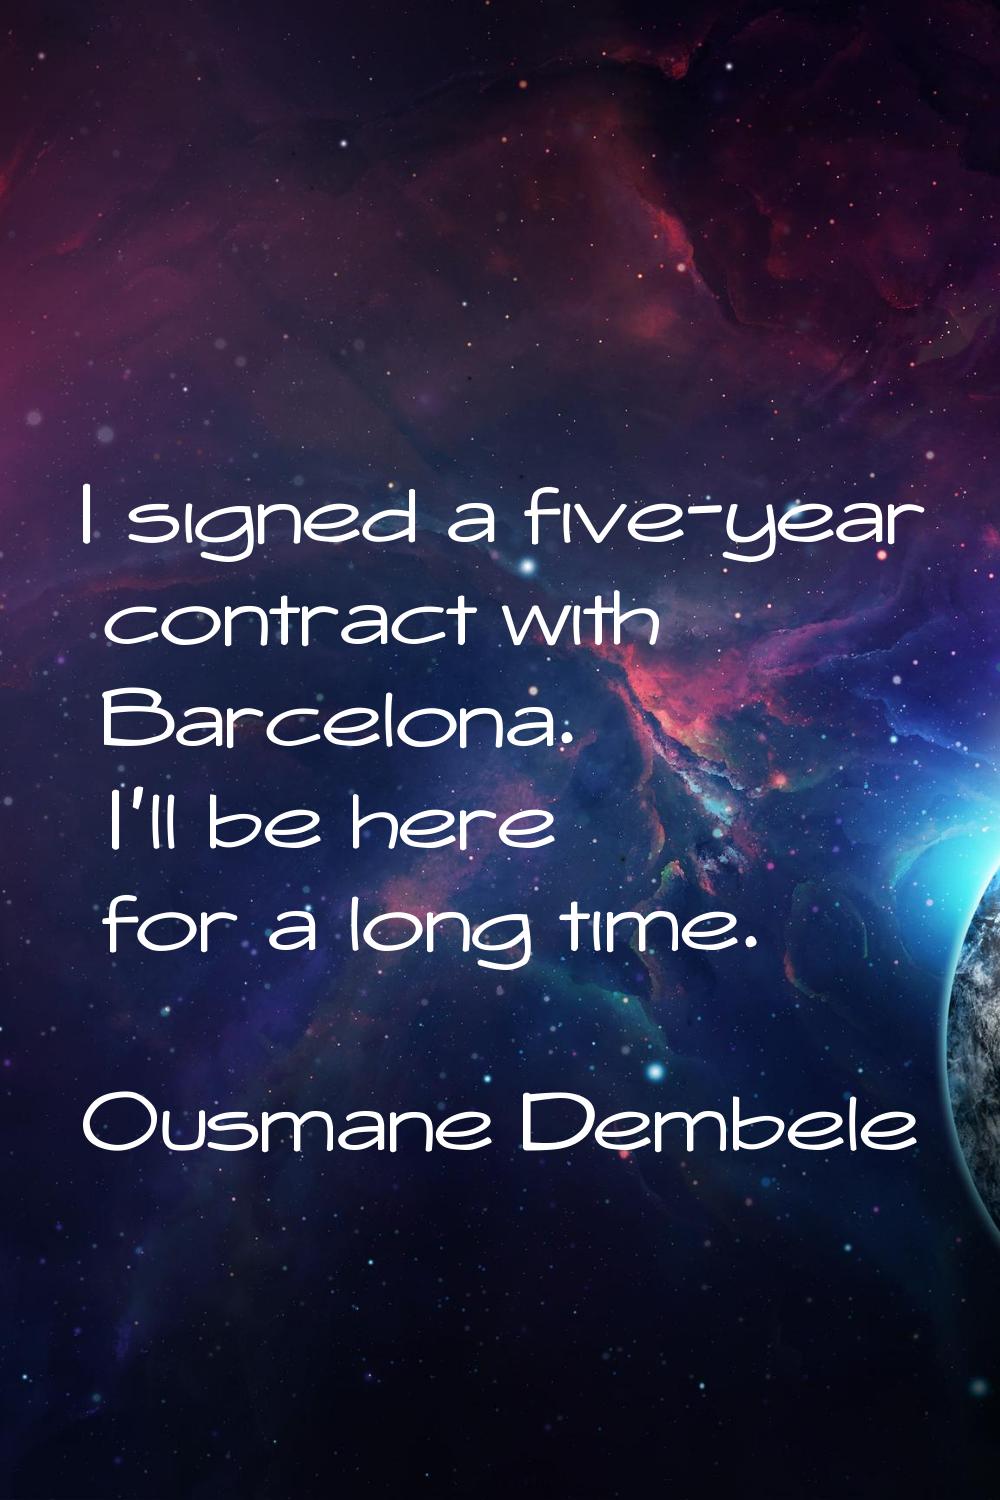 I signed a five-year contract with Barcelona. I'll be here for a long time.